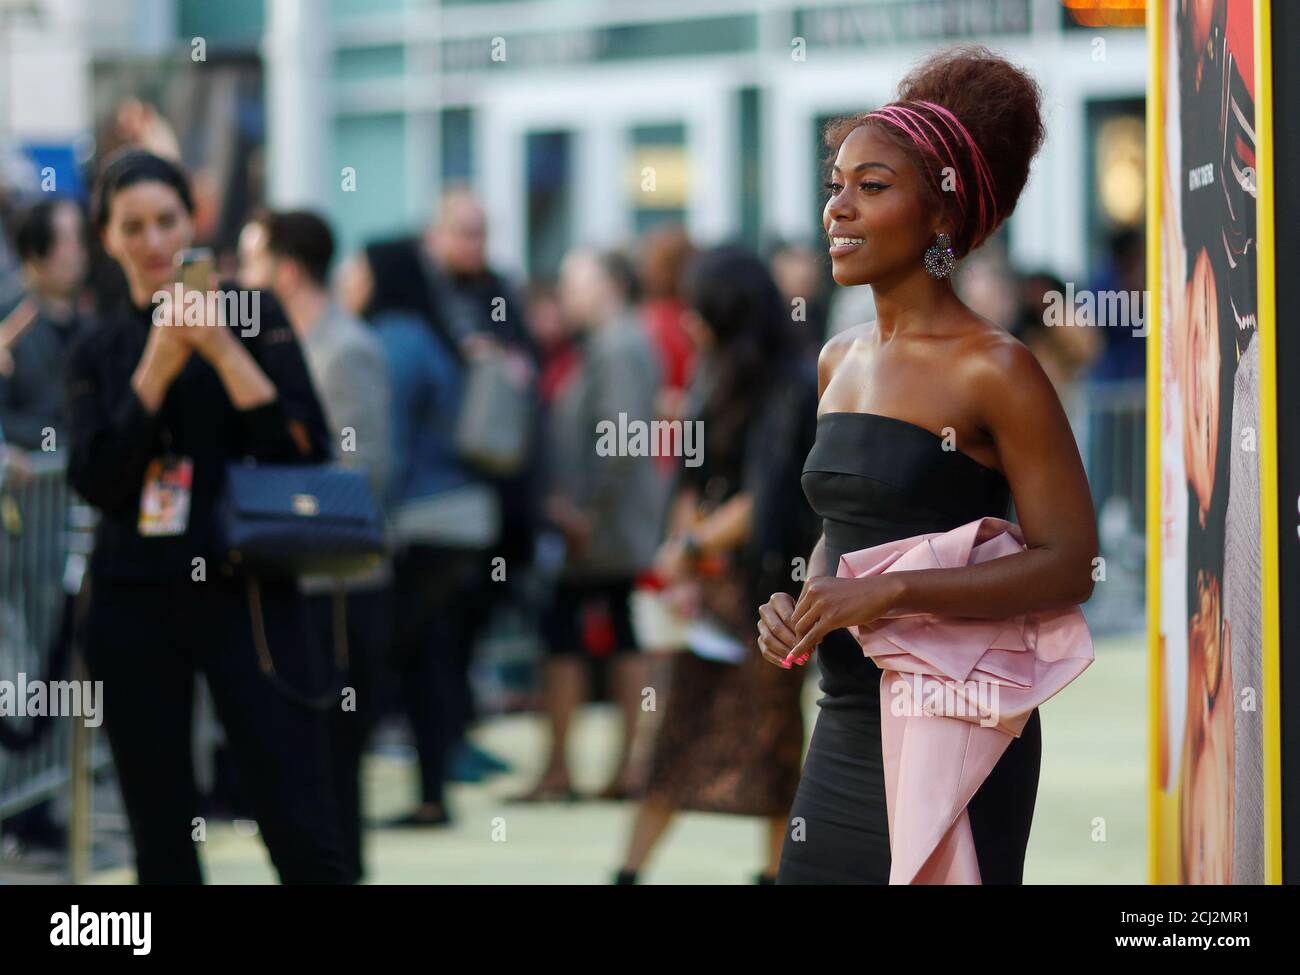 Cast member DeWanda Wise poses at a screening for the film “Someone Great” in Los Angeles, California, U.S., April 17, 2019. REUTERS/Mario Anzuoni Stock Photo